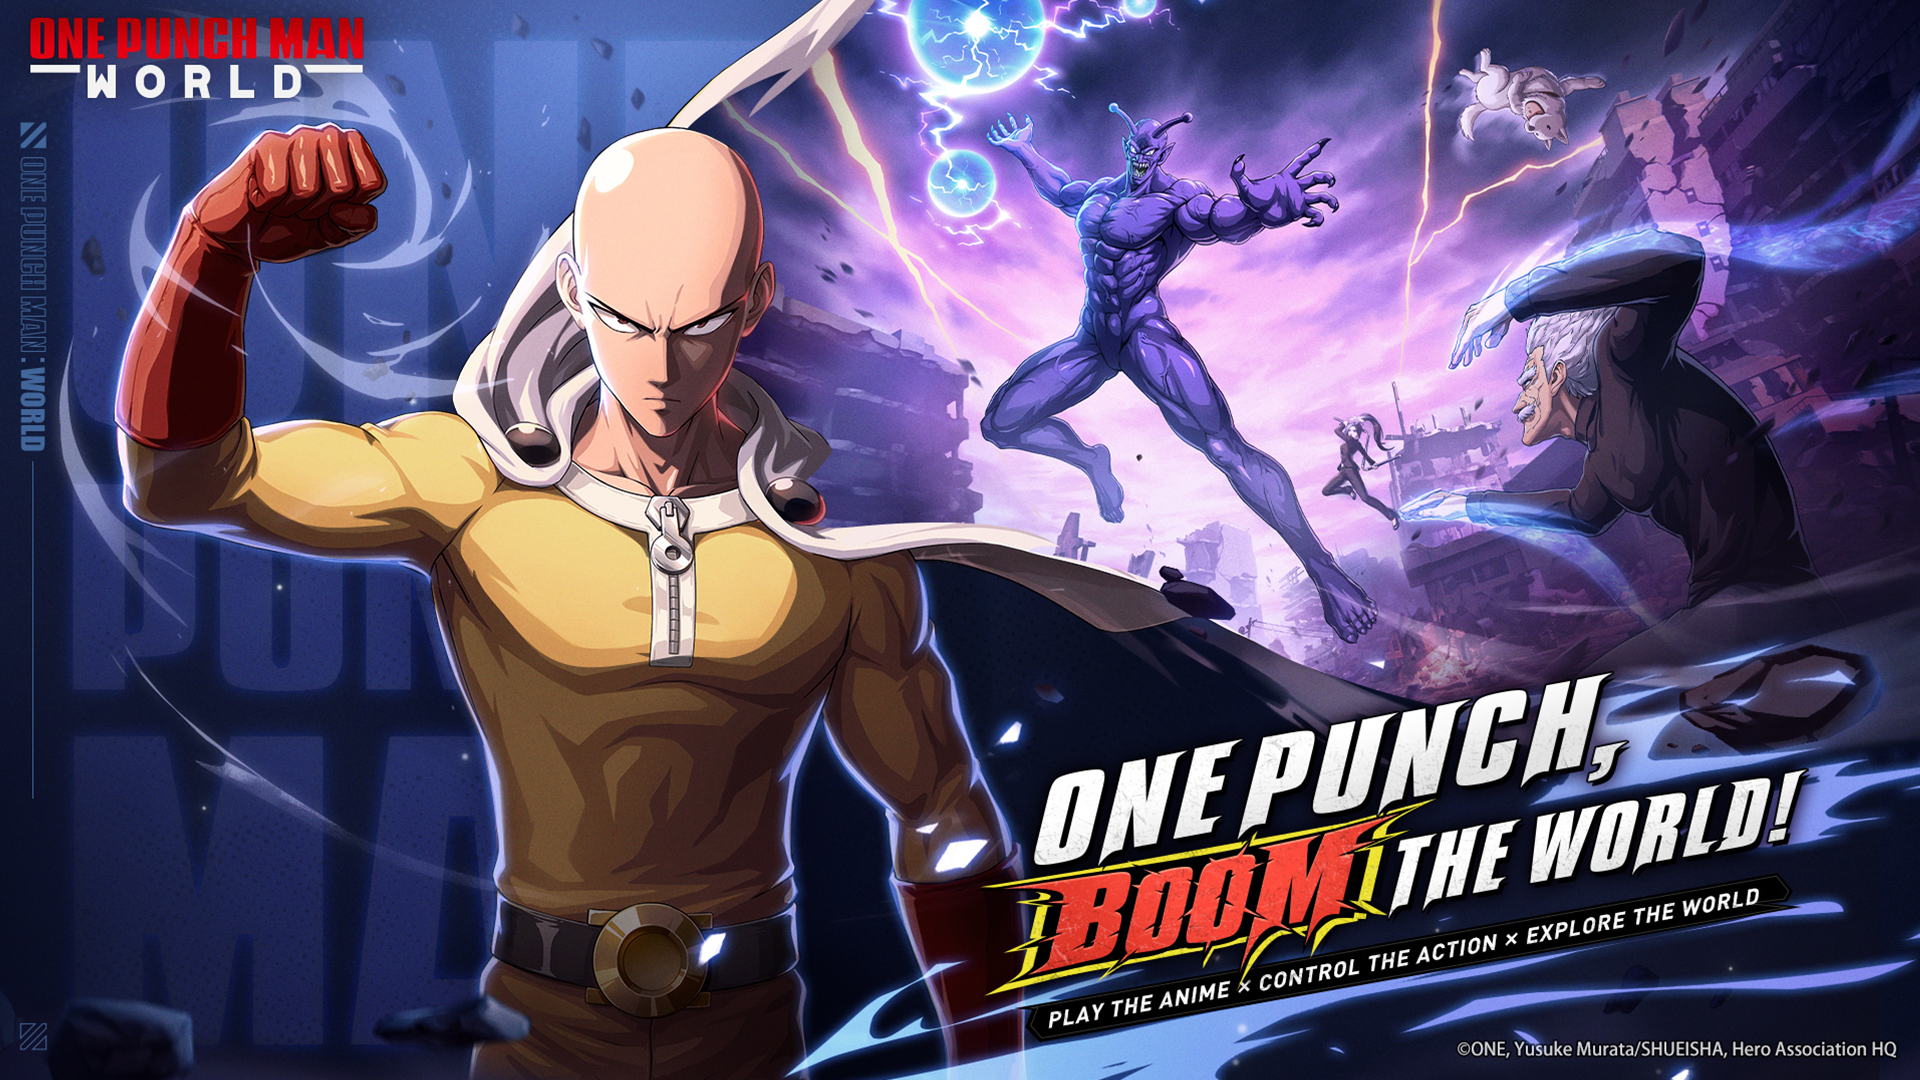 Everything you need to know about One Punch Man World before the official release